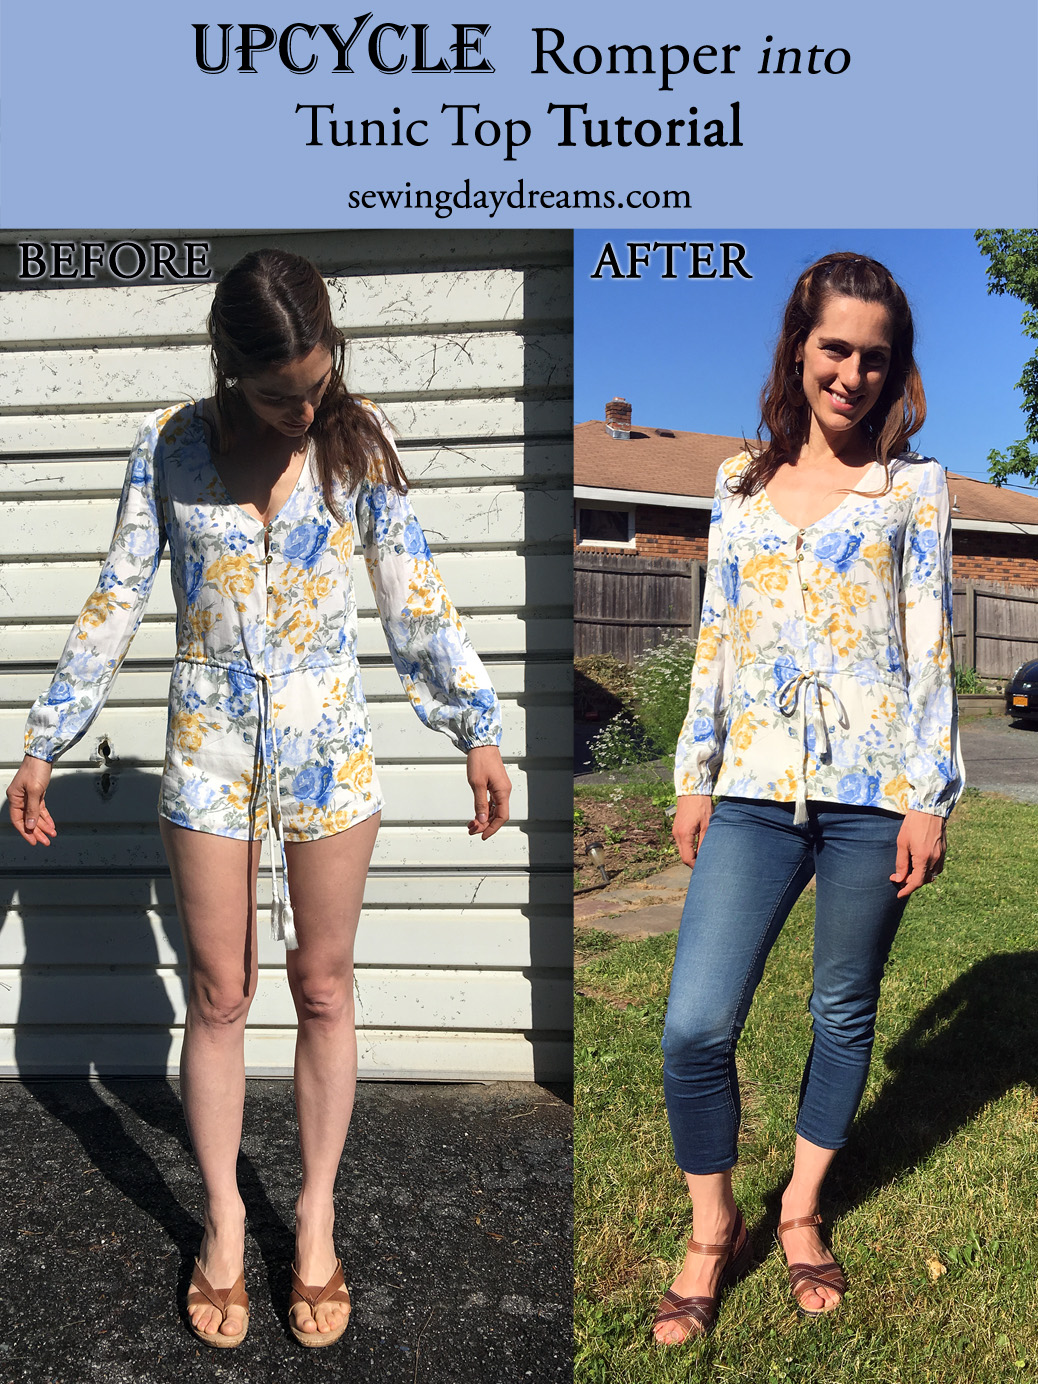 DIY - Upcycle Romper into Tunic Top Tutorial